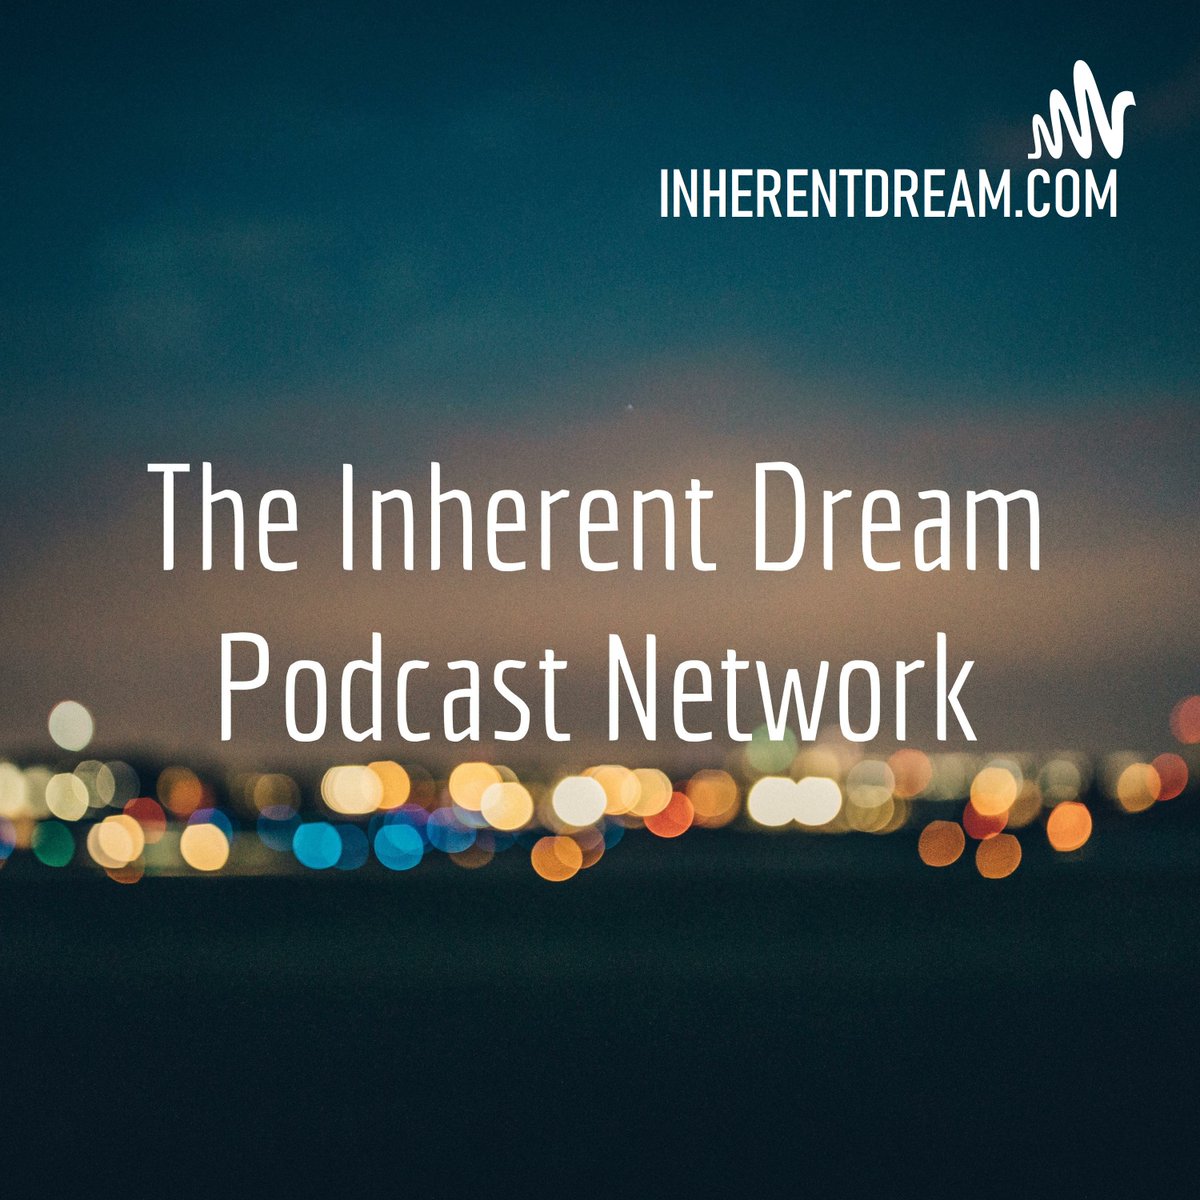 Have you checked out The Inherent Dream Podcast Network? Home to 763 The Local, The Trevor J Brown Show and Bonus Content Saturdays. 
https://t.co/nXajpK34VG

#podcasts #minnesota #news #info #weather #sports #interviews #763thelocal #thetrevorjbrownshow #bonuscontentsaturdays https://t.co/94Fzg2uRBa